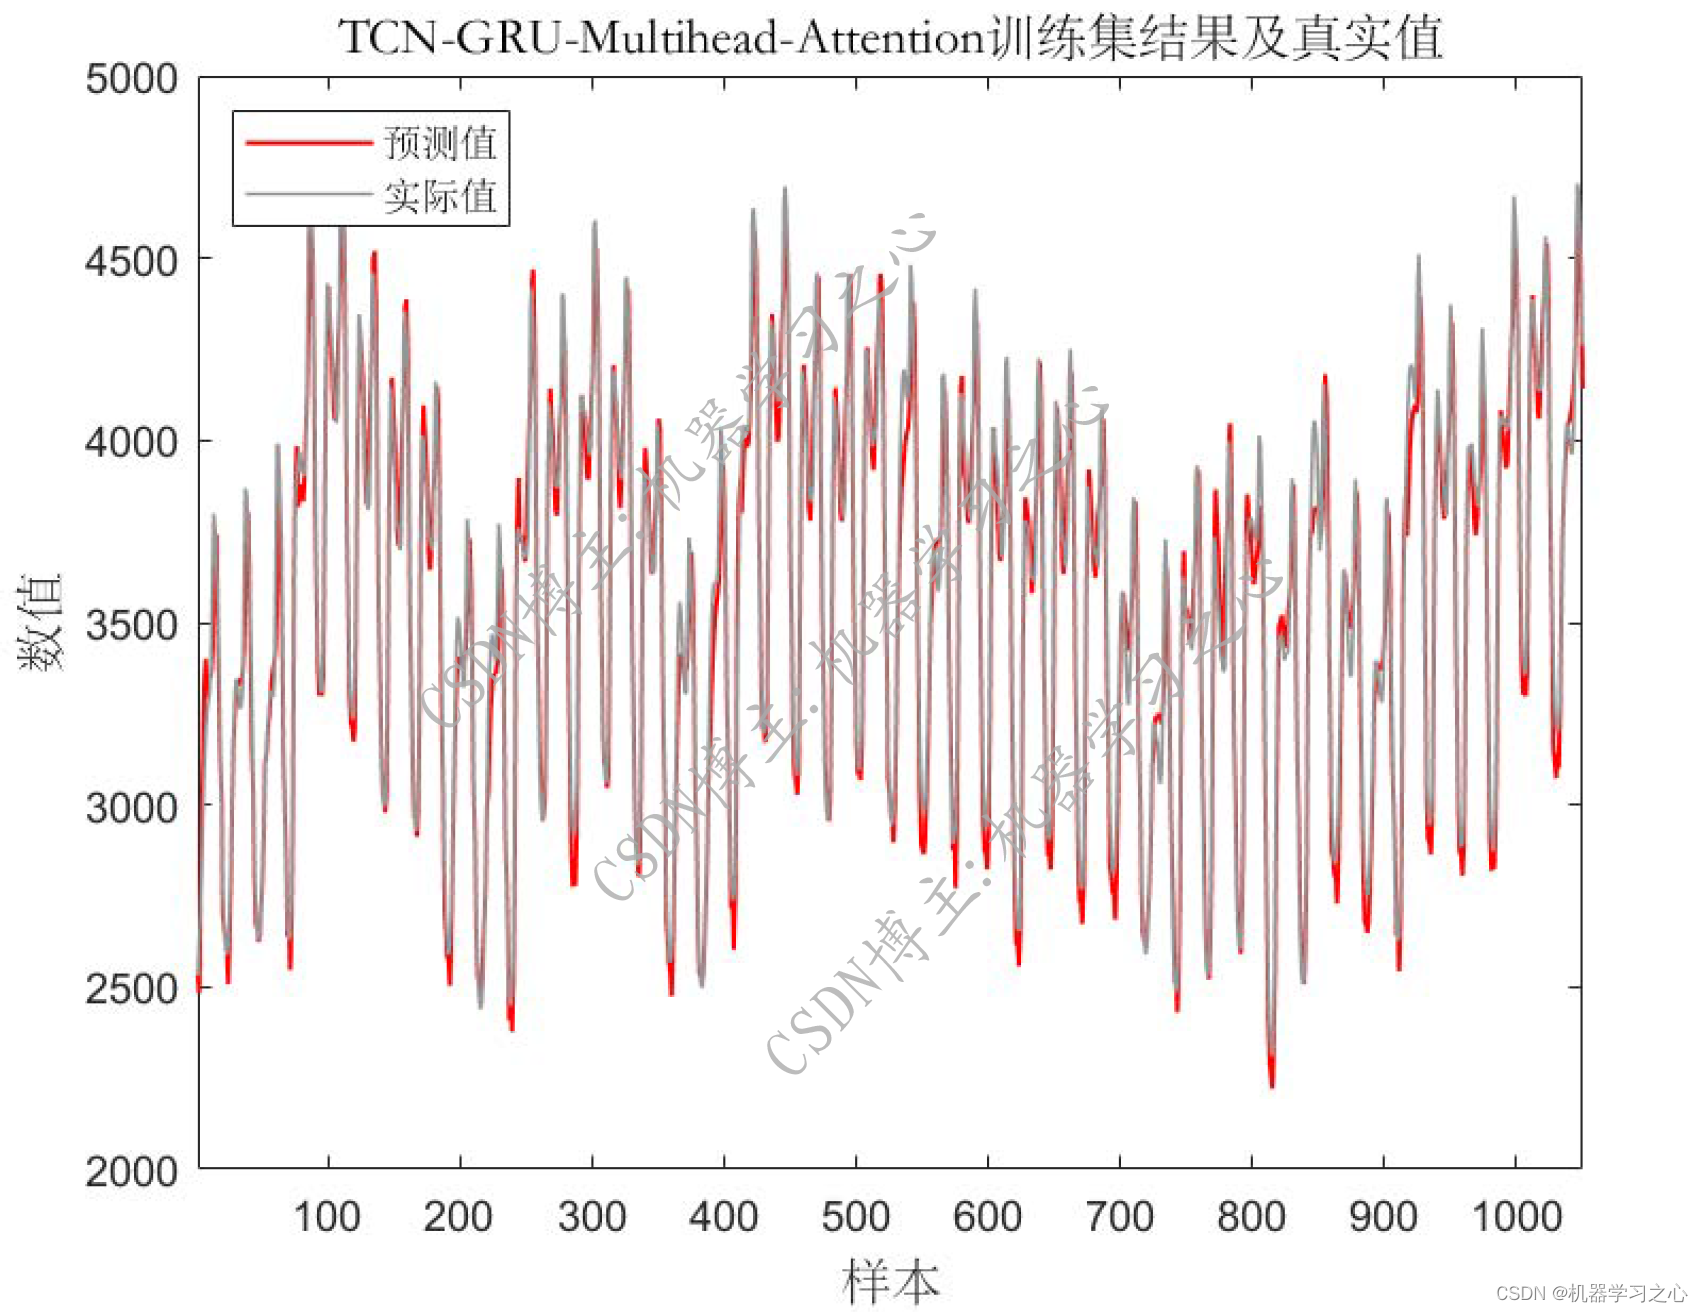 EI级 | <span style='color:red;'>Matlab</span><span style='color:red;'>实现</span>TCN-GRU-<span style='color:red;'>Multihead</span>-<span style='color:red;'>Attention</span><span style='color:red;'>多头</span><span style='color:red;'>注意力</span><span style='color:red;'>机制</span><span style='color:red;'>多</span><span style='color:red;'>变量</span><span style='color:red;'>时间</span><span style='color:red;'>序列</span><span style='color:red;'>预测</span>